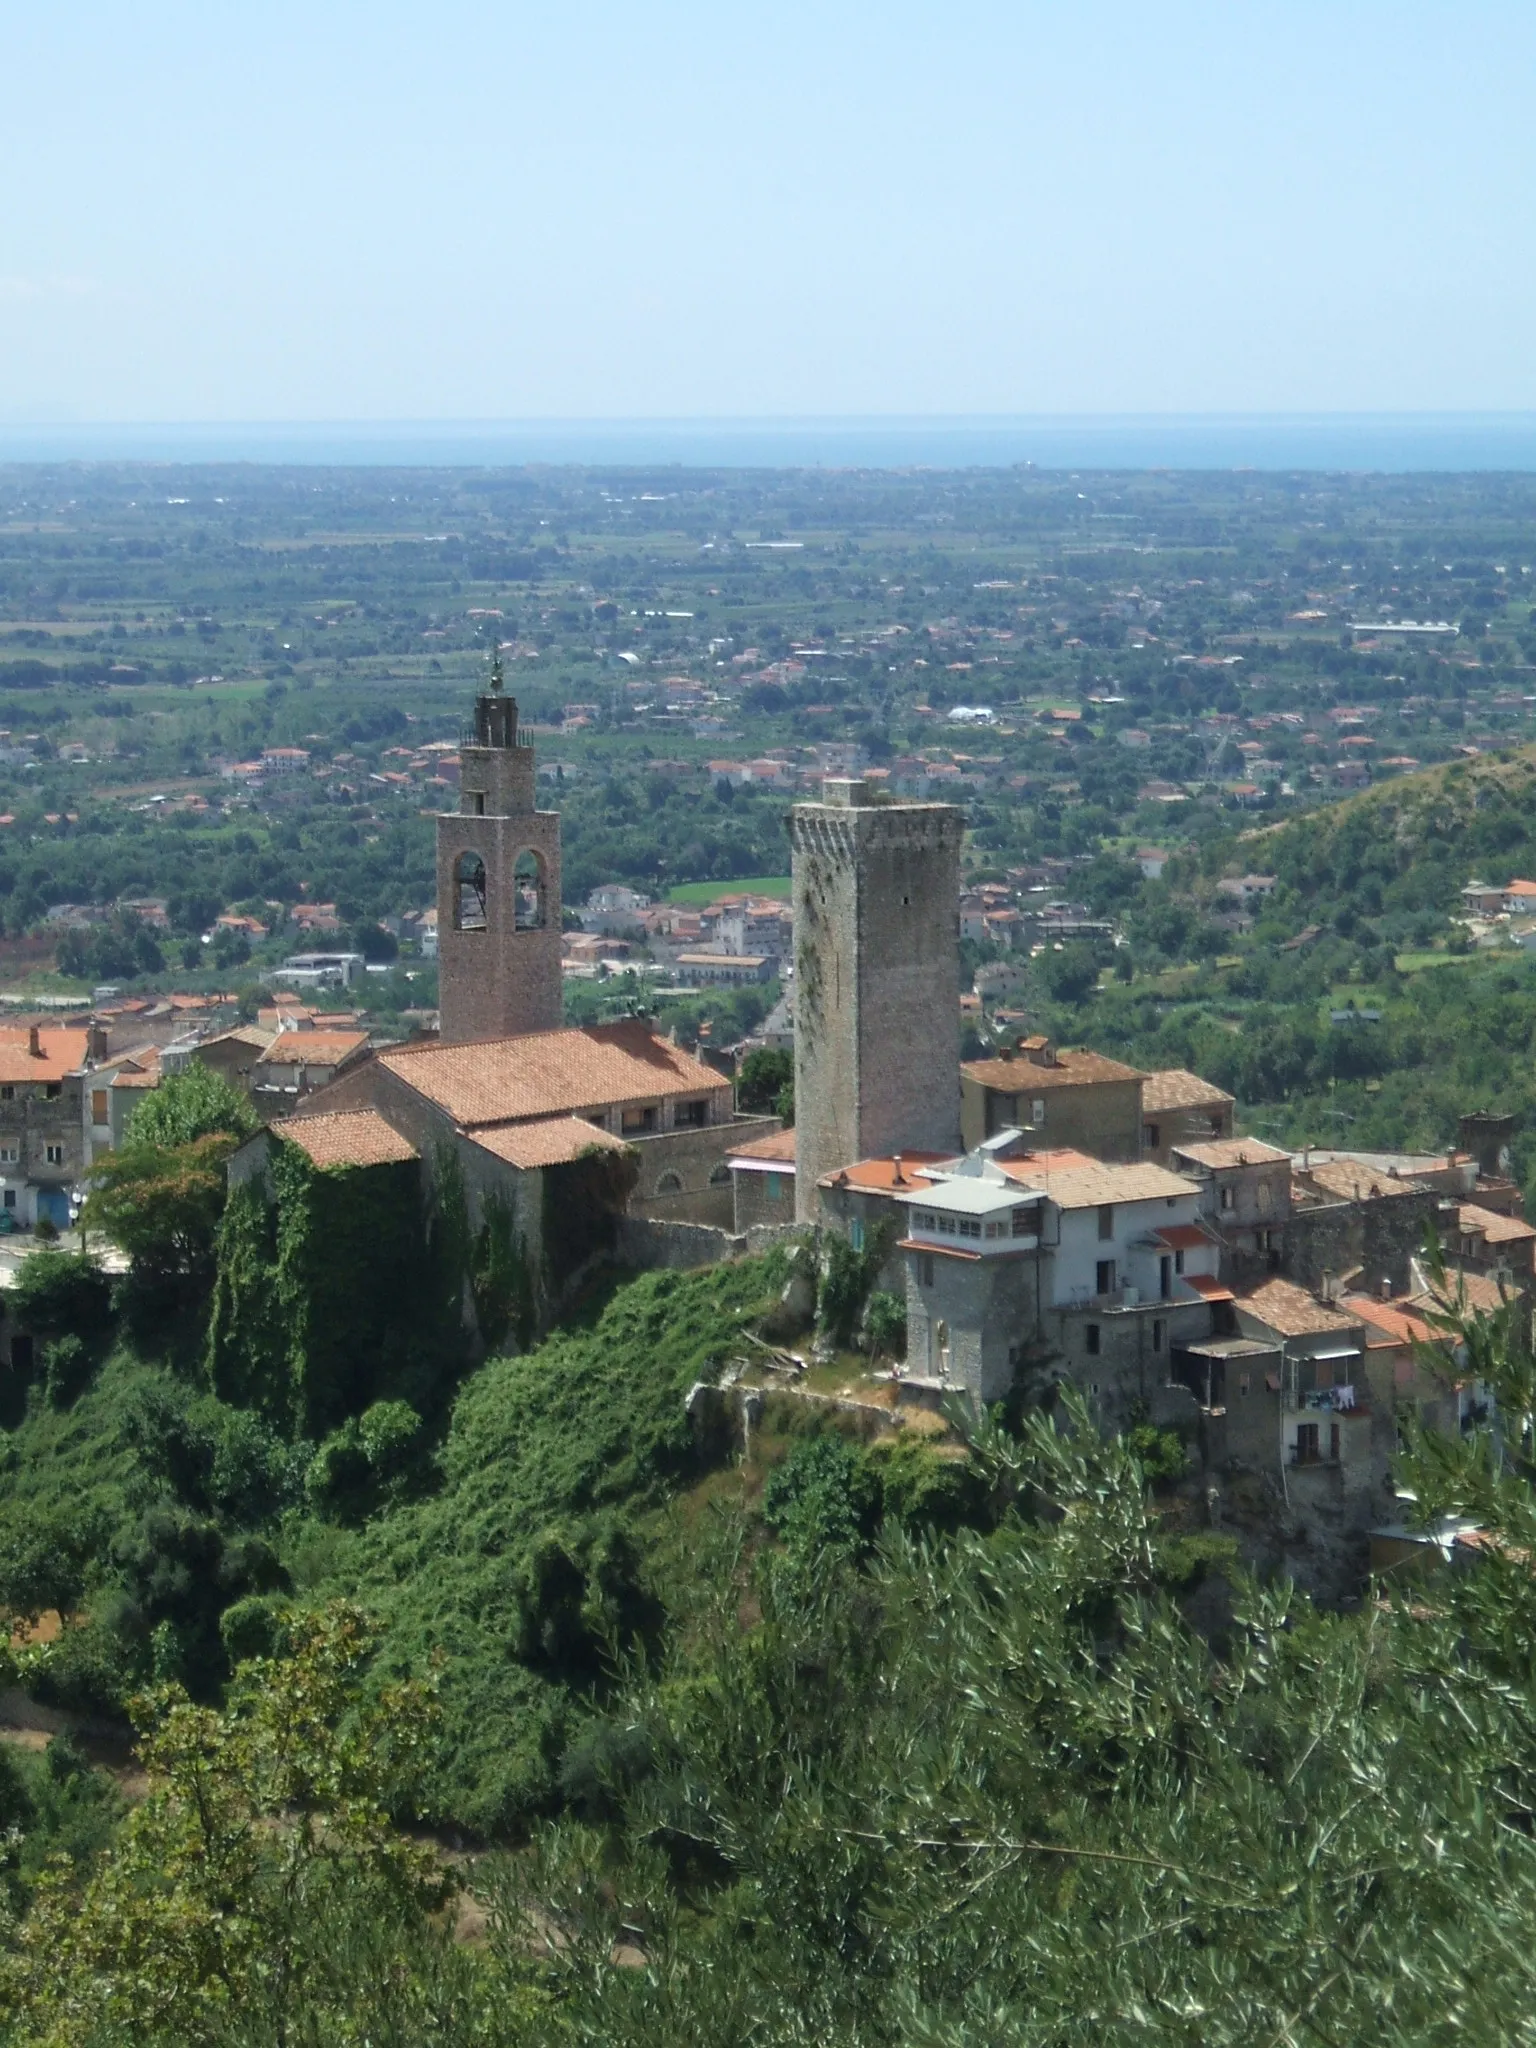 Photo showing: The Picture shows the view from the hill behind the town center of Castelforte ( Latina Province, Latium Region, Italy) of the Garigliano river valley and the Tyrrenian sea.